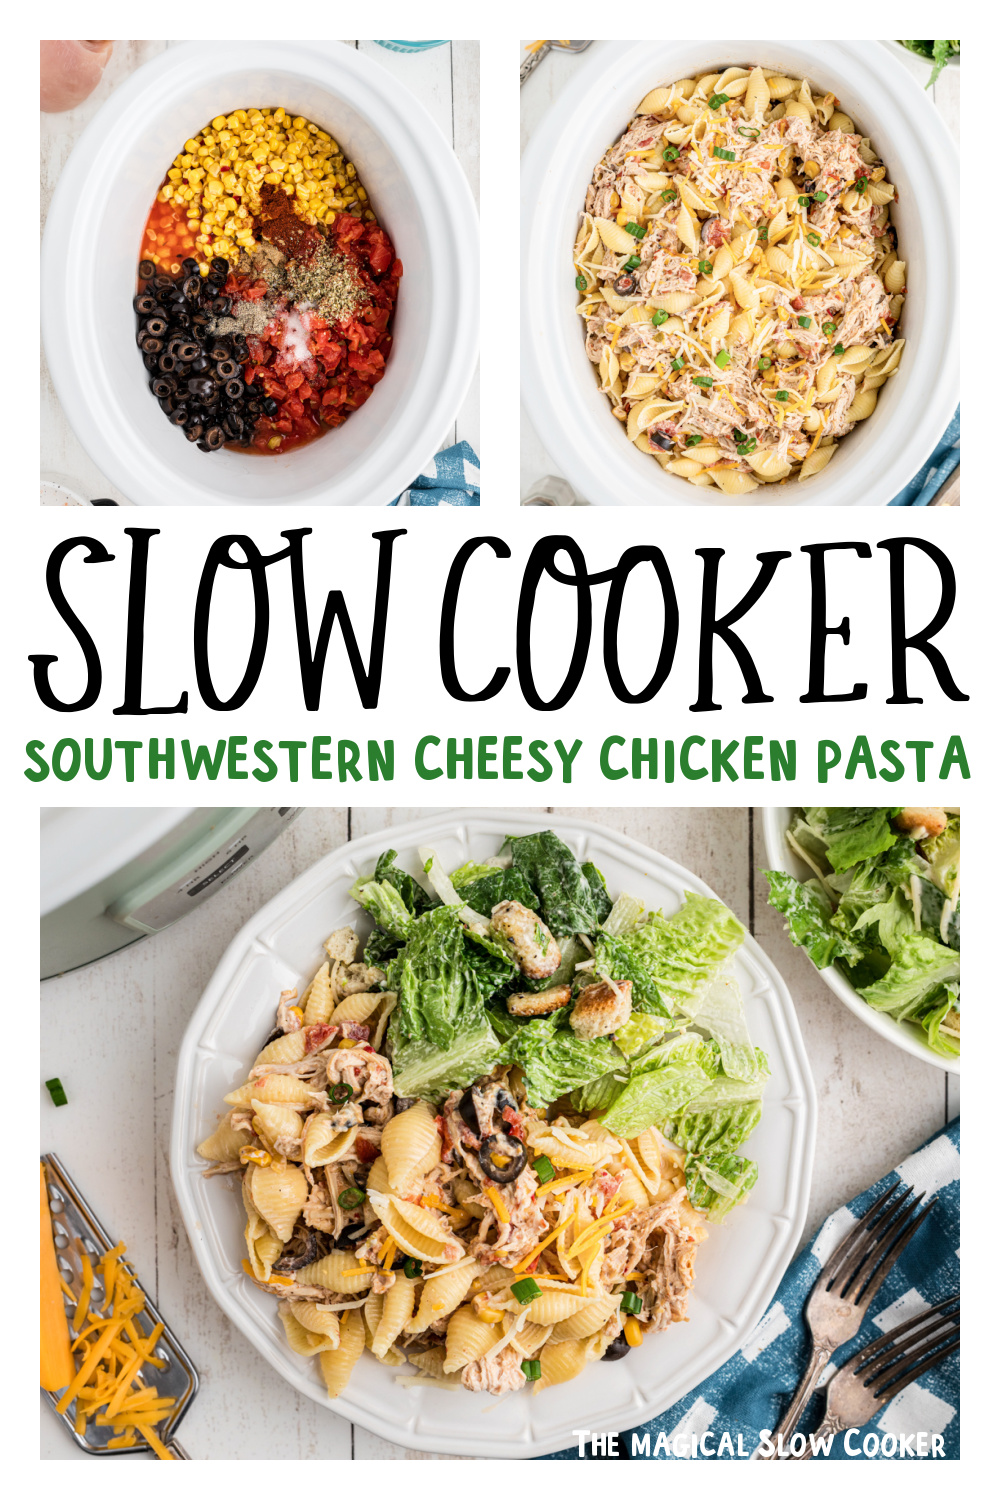 three images of slow cooker southwestern cheesy chicken pasta for pinterest.